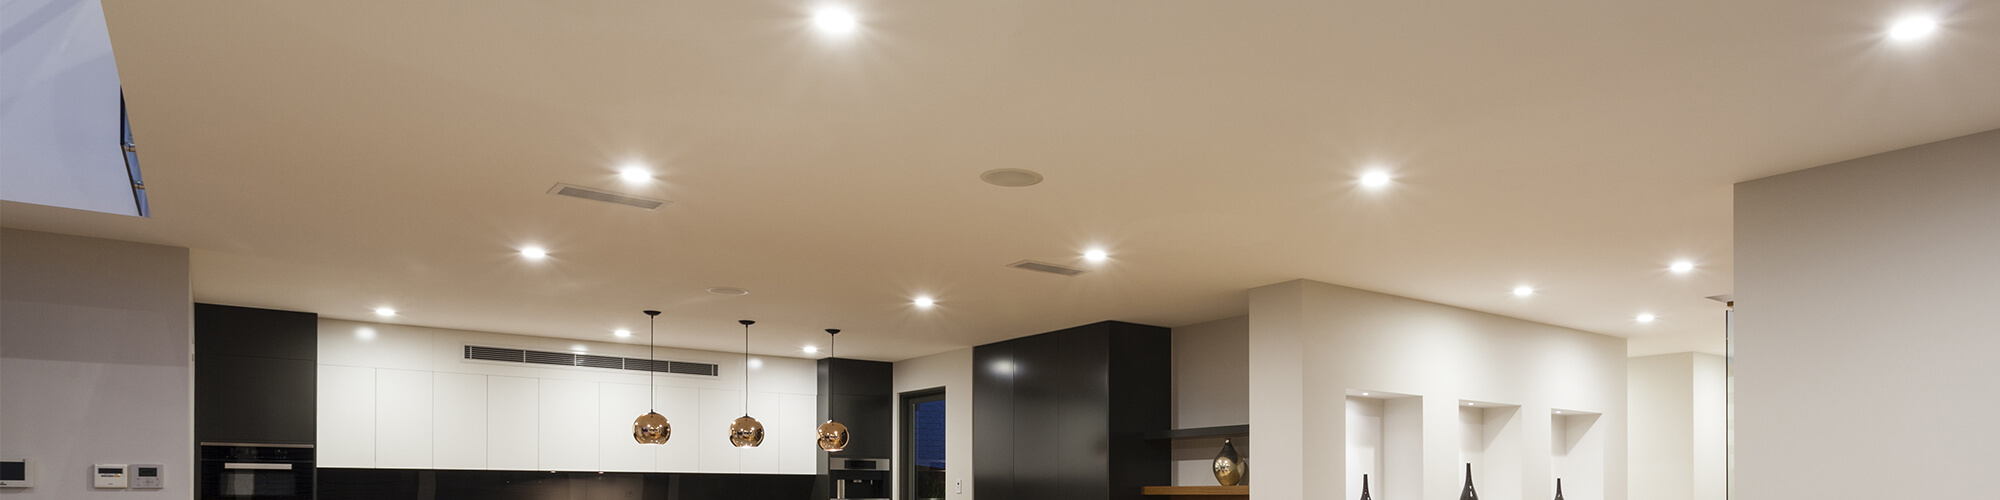 22 Different Types Of Recessed Lighting Buying Guide Home